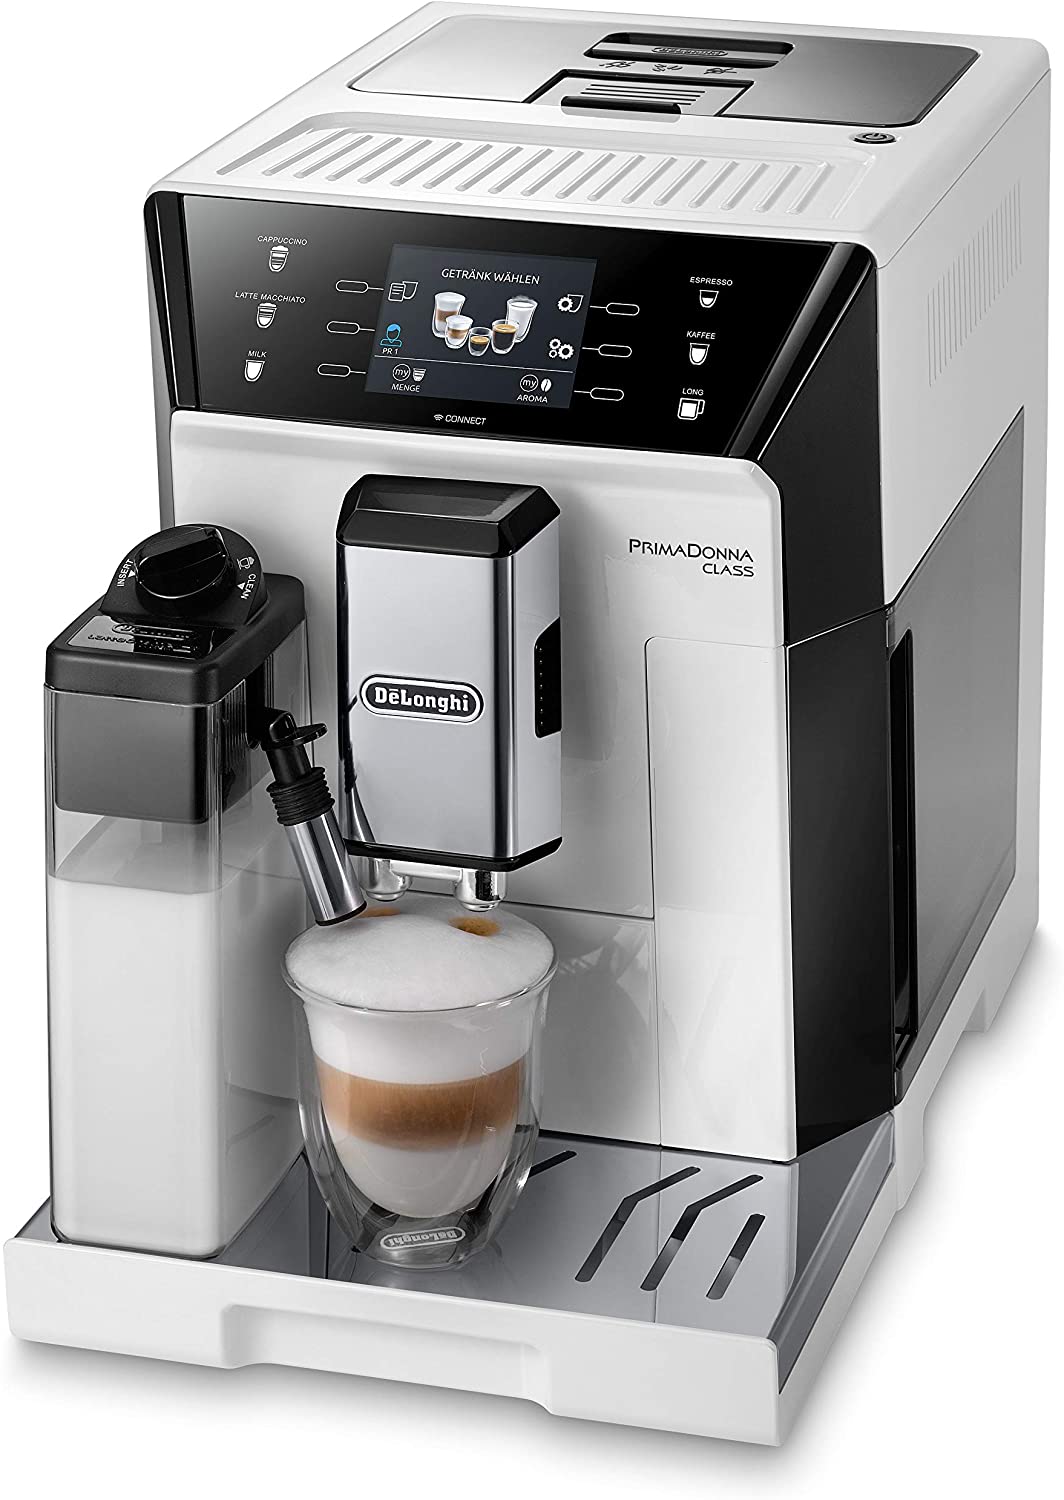 DeLonghi De\'Longhi PrimaDonna Class Fully Automatic Coffee Machine with Milk System, Cappuccino and Espresso at the Touch of a Button, 3.5 Inch TFT Colour Display and App Control